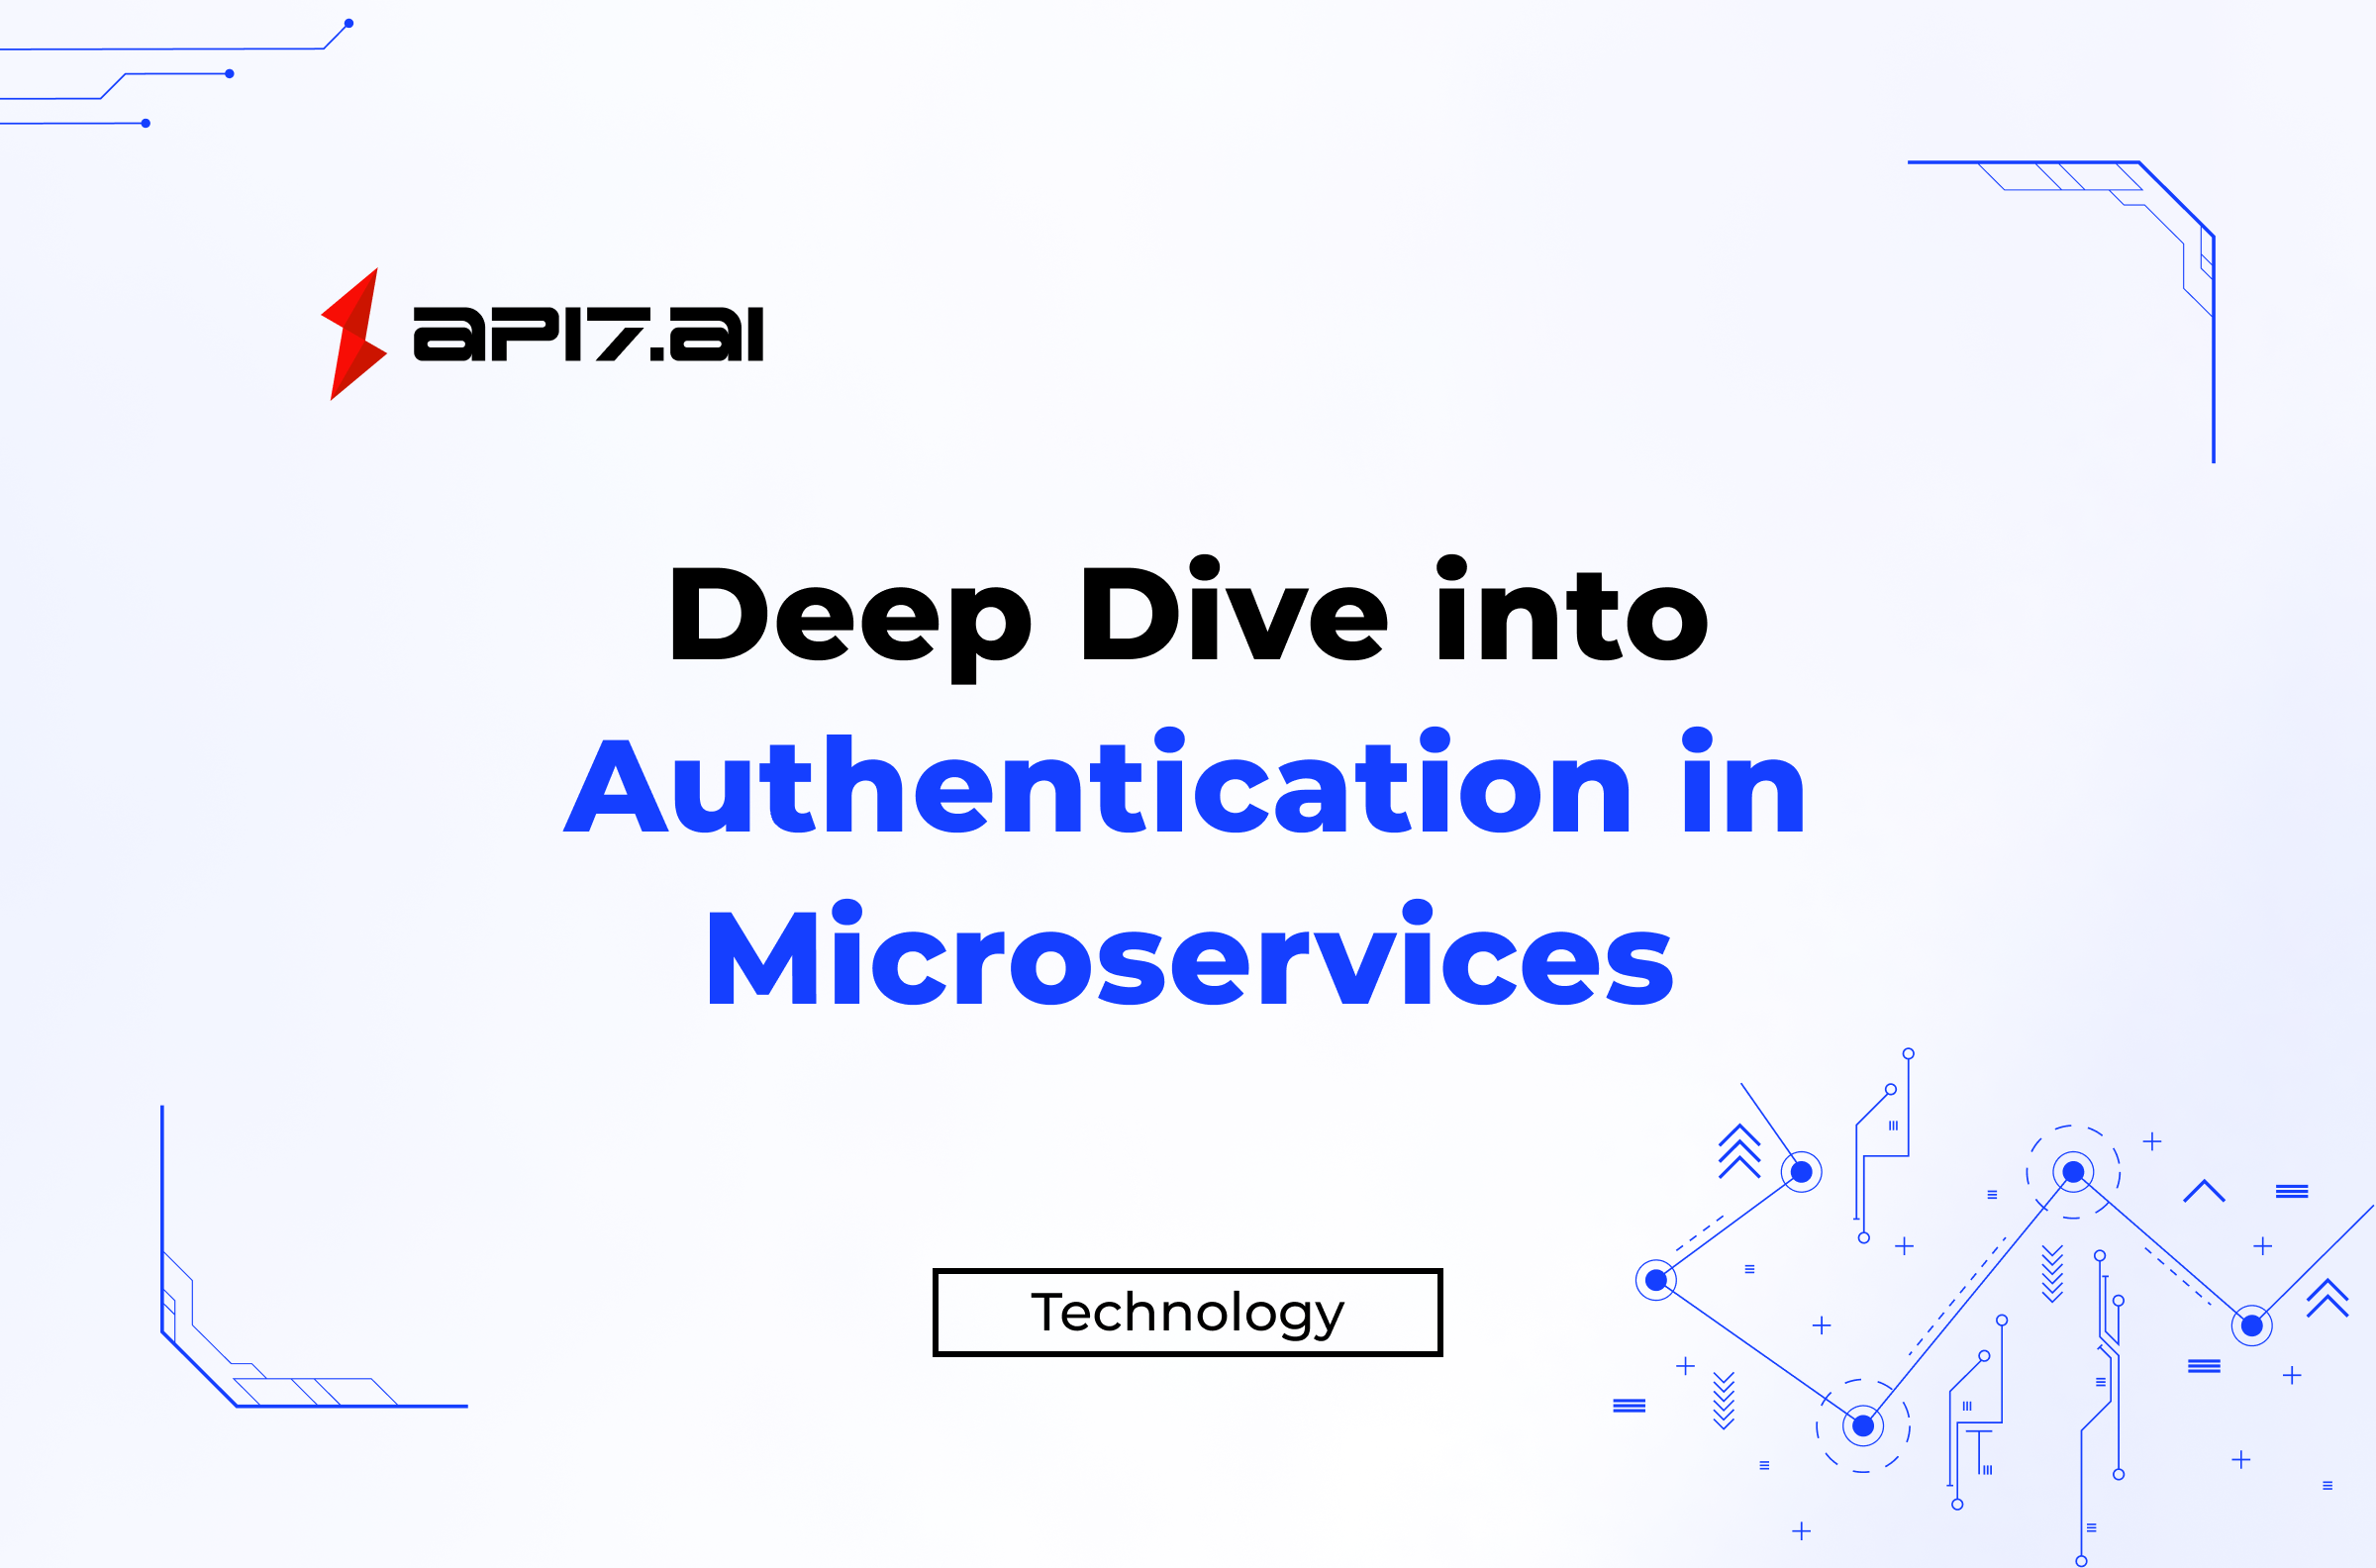 Deep Dive into Authentication in Microservices